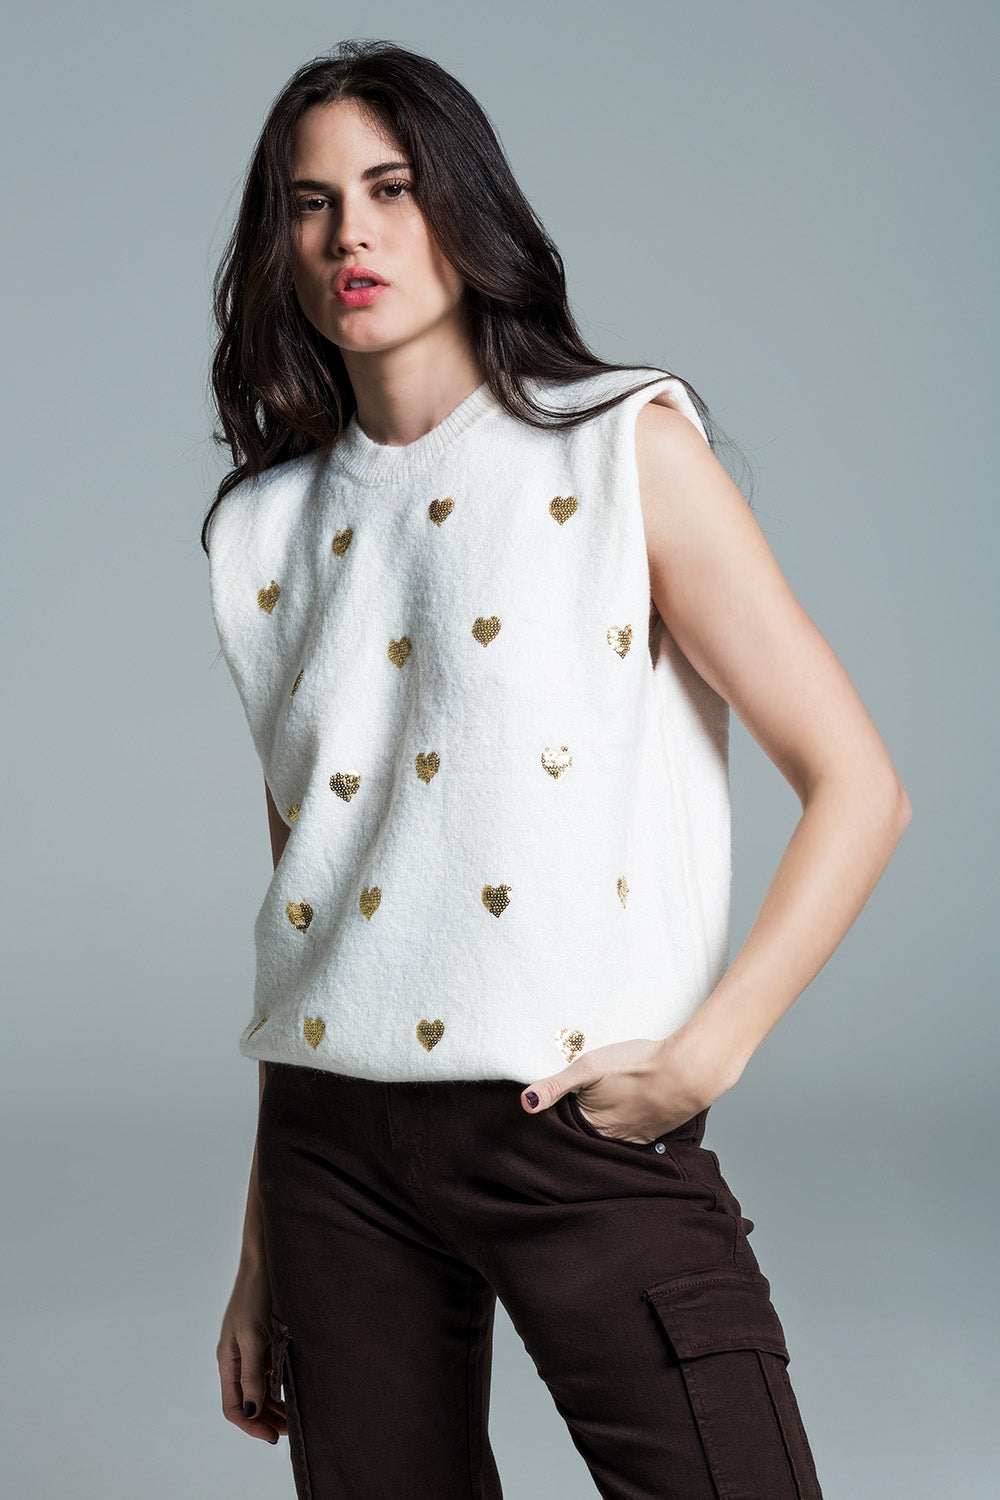 Q2 Sleeveless sweater in white with silver sequin hearts